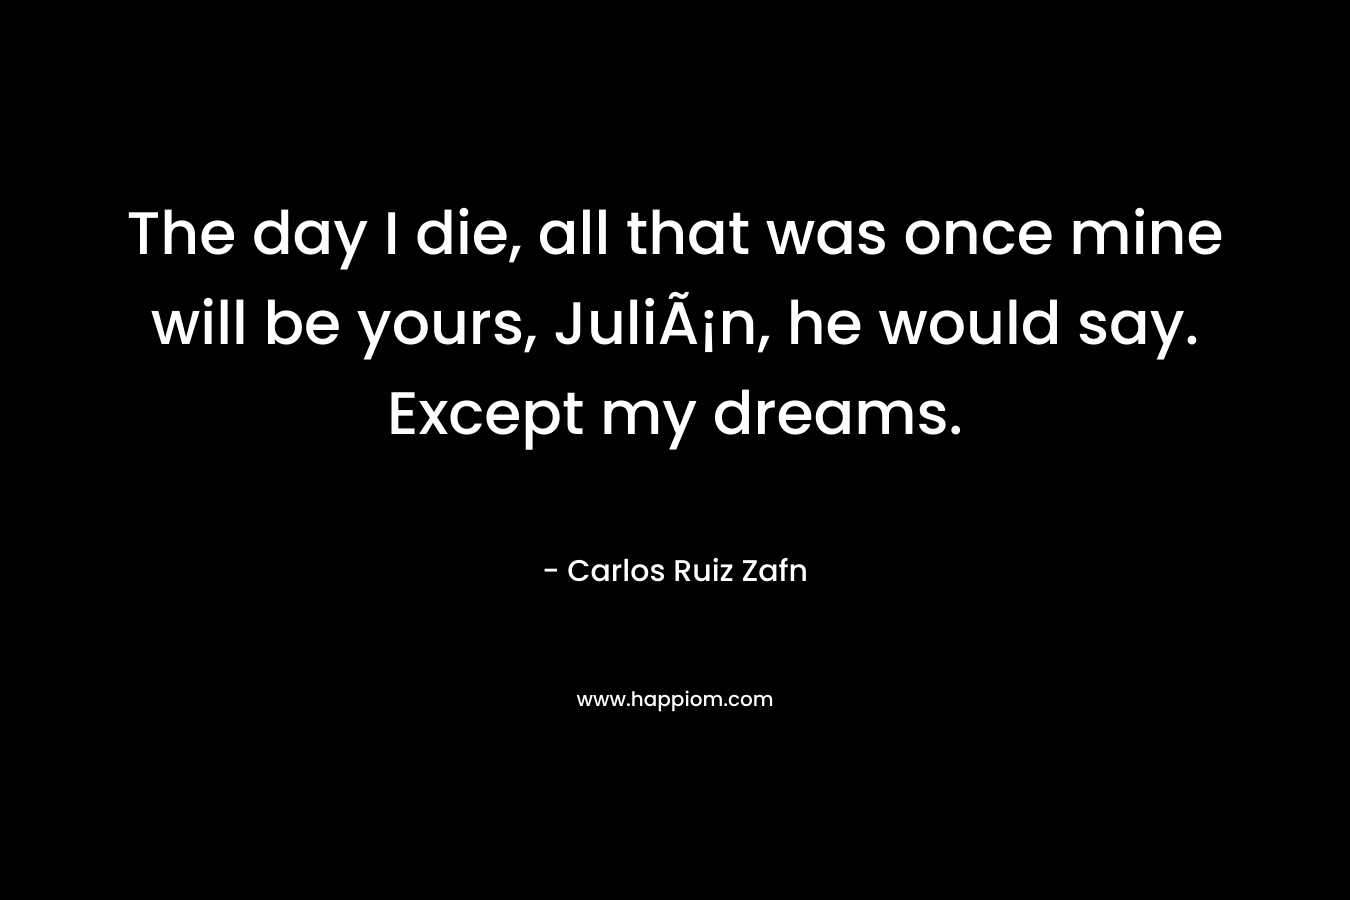 The day I die, all that was once mine will be yours, JuliÃ¡n, he would say. Except my dreams.